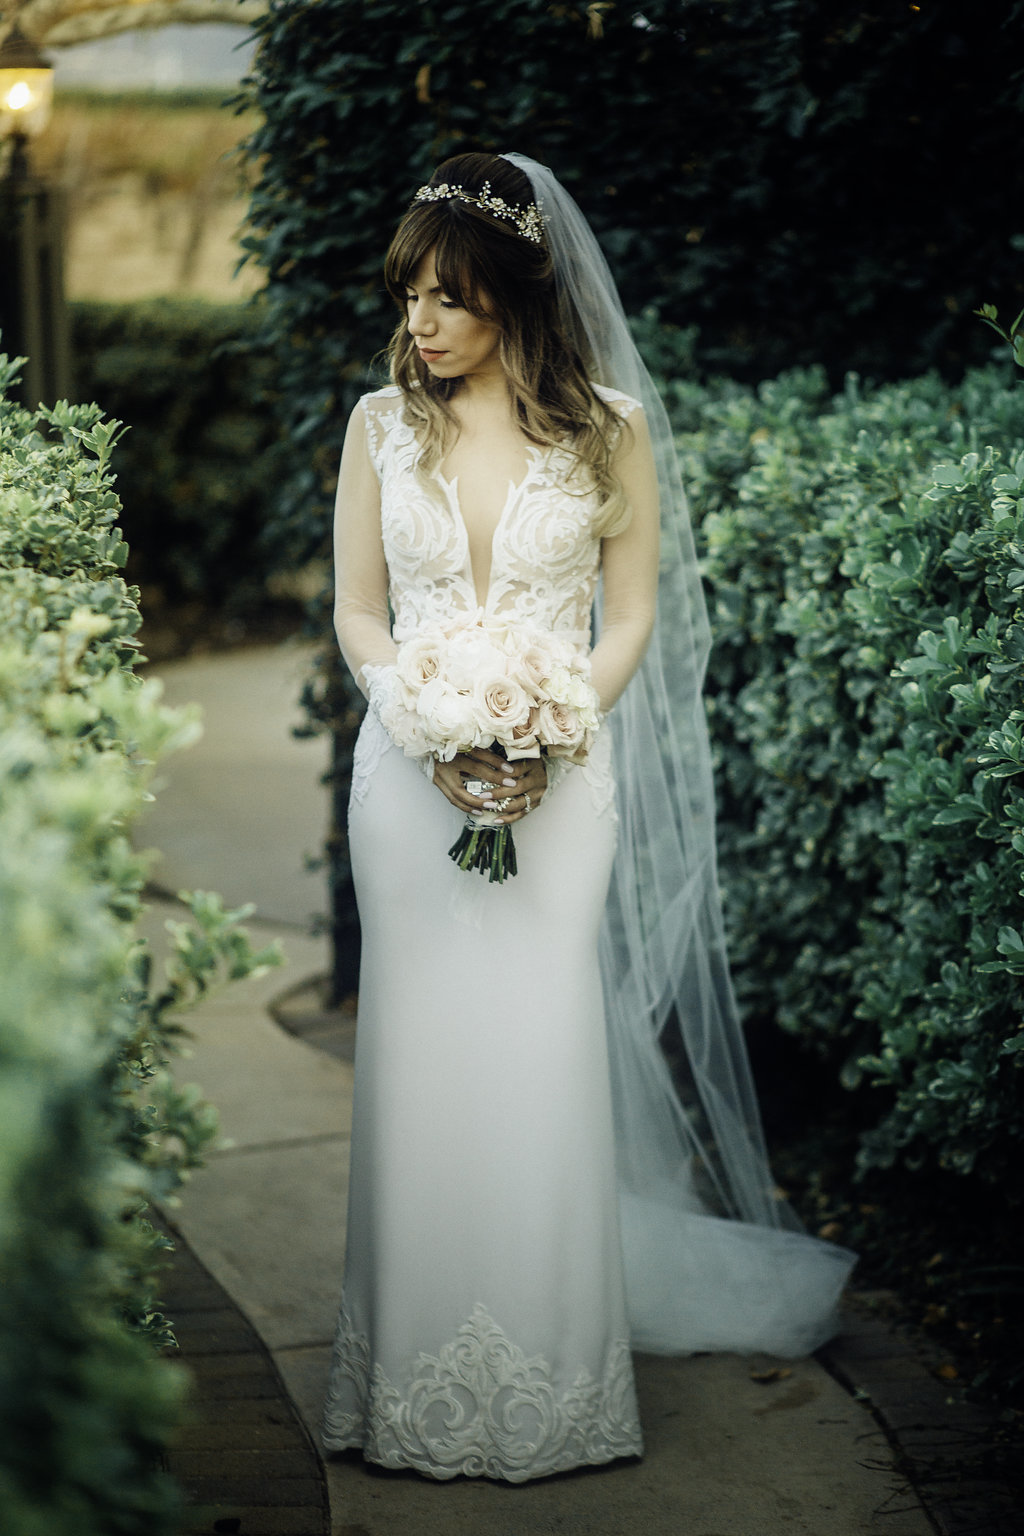 Wedding Photograph Of Bride Standing While Carrying a Bouquet in The Garden Los Angeles